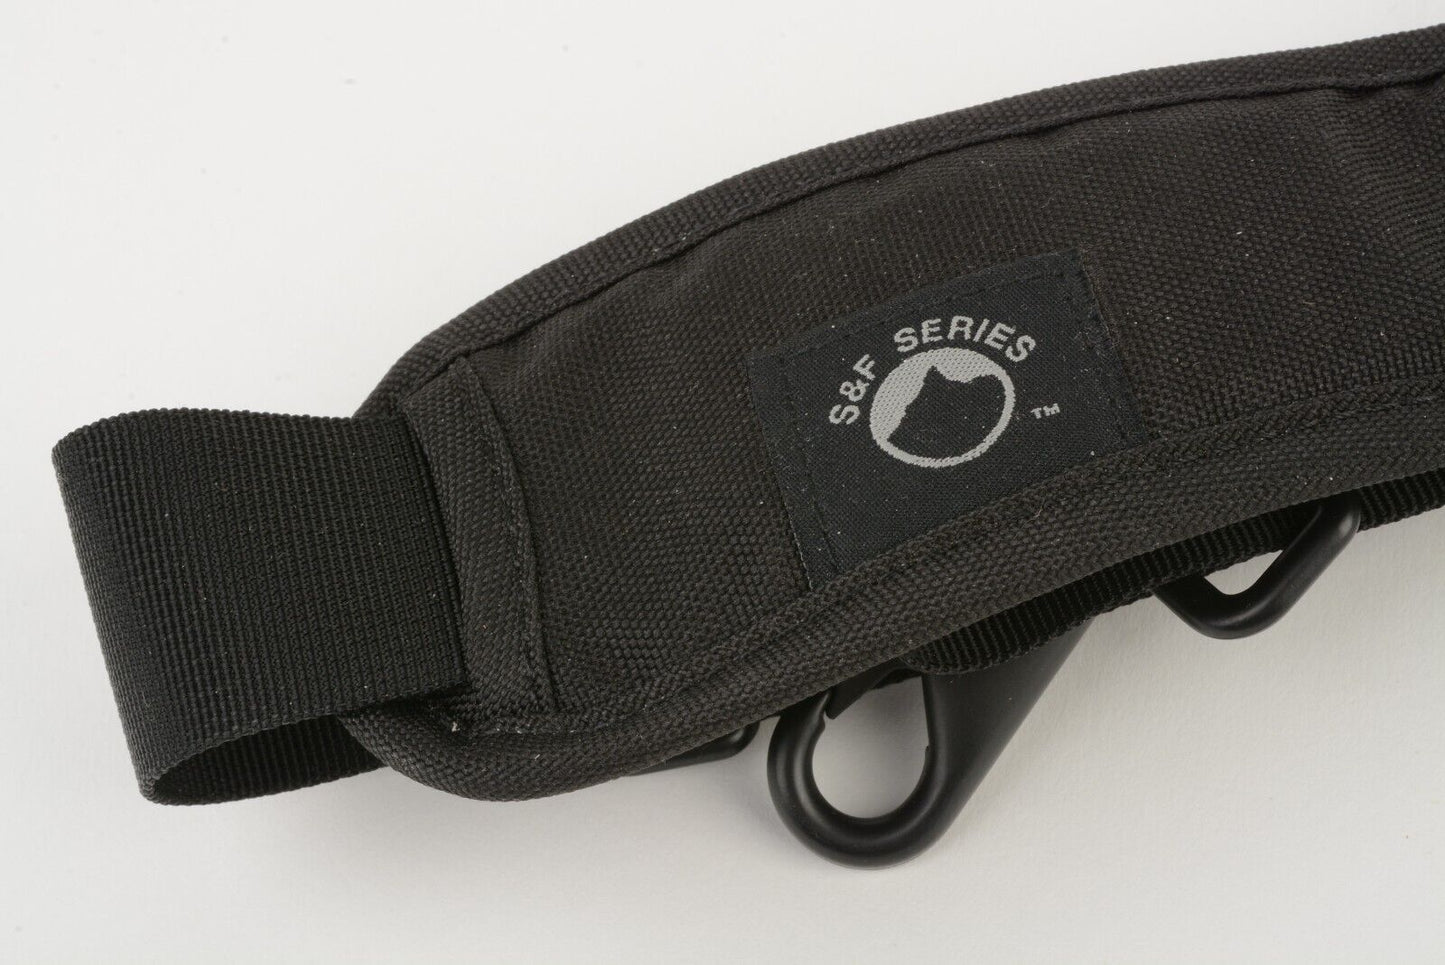 NEW LOWEPRO SHOULDER STRAP S&F SERIES - GREAT QUALITY, CLEAN!